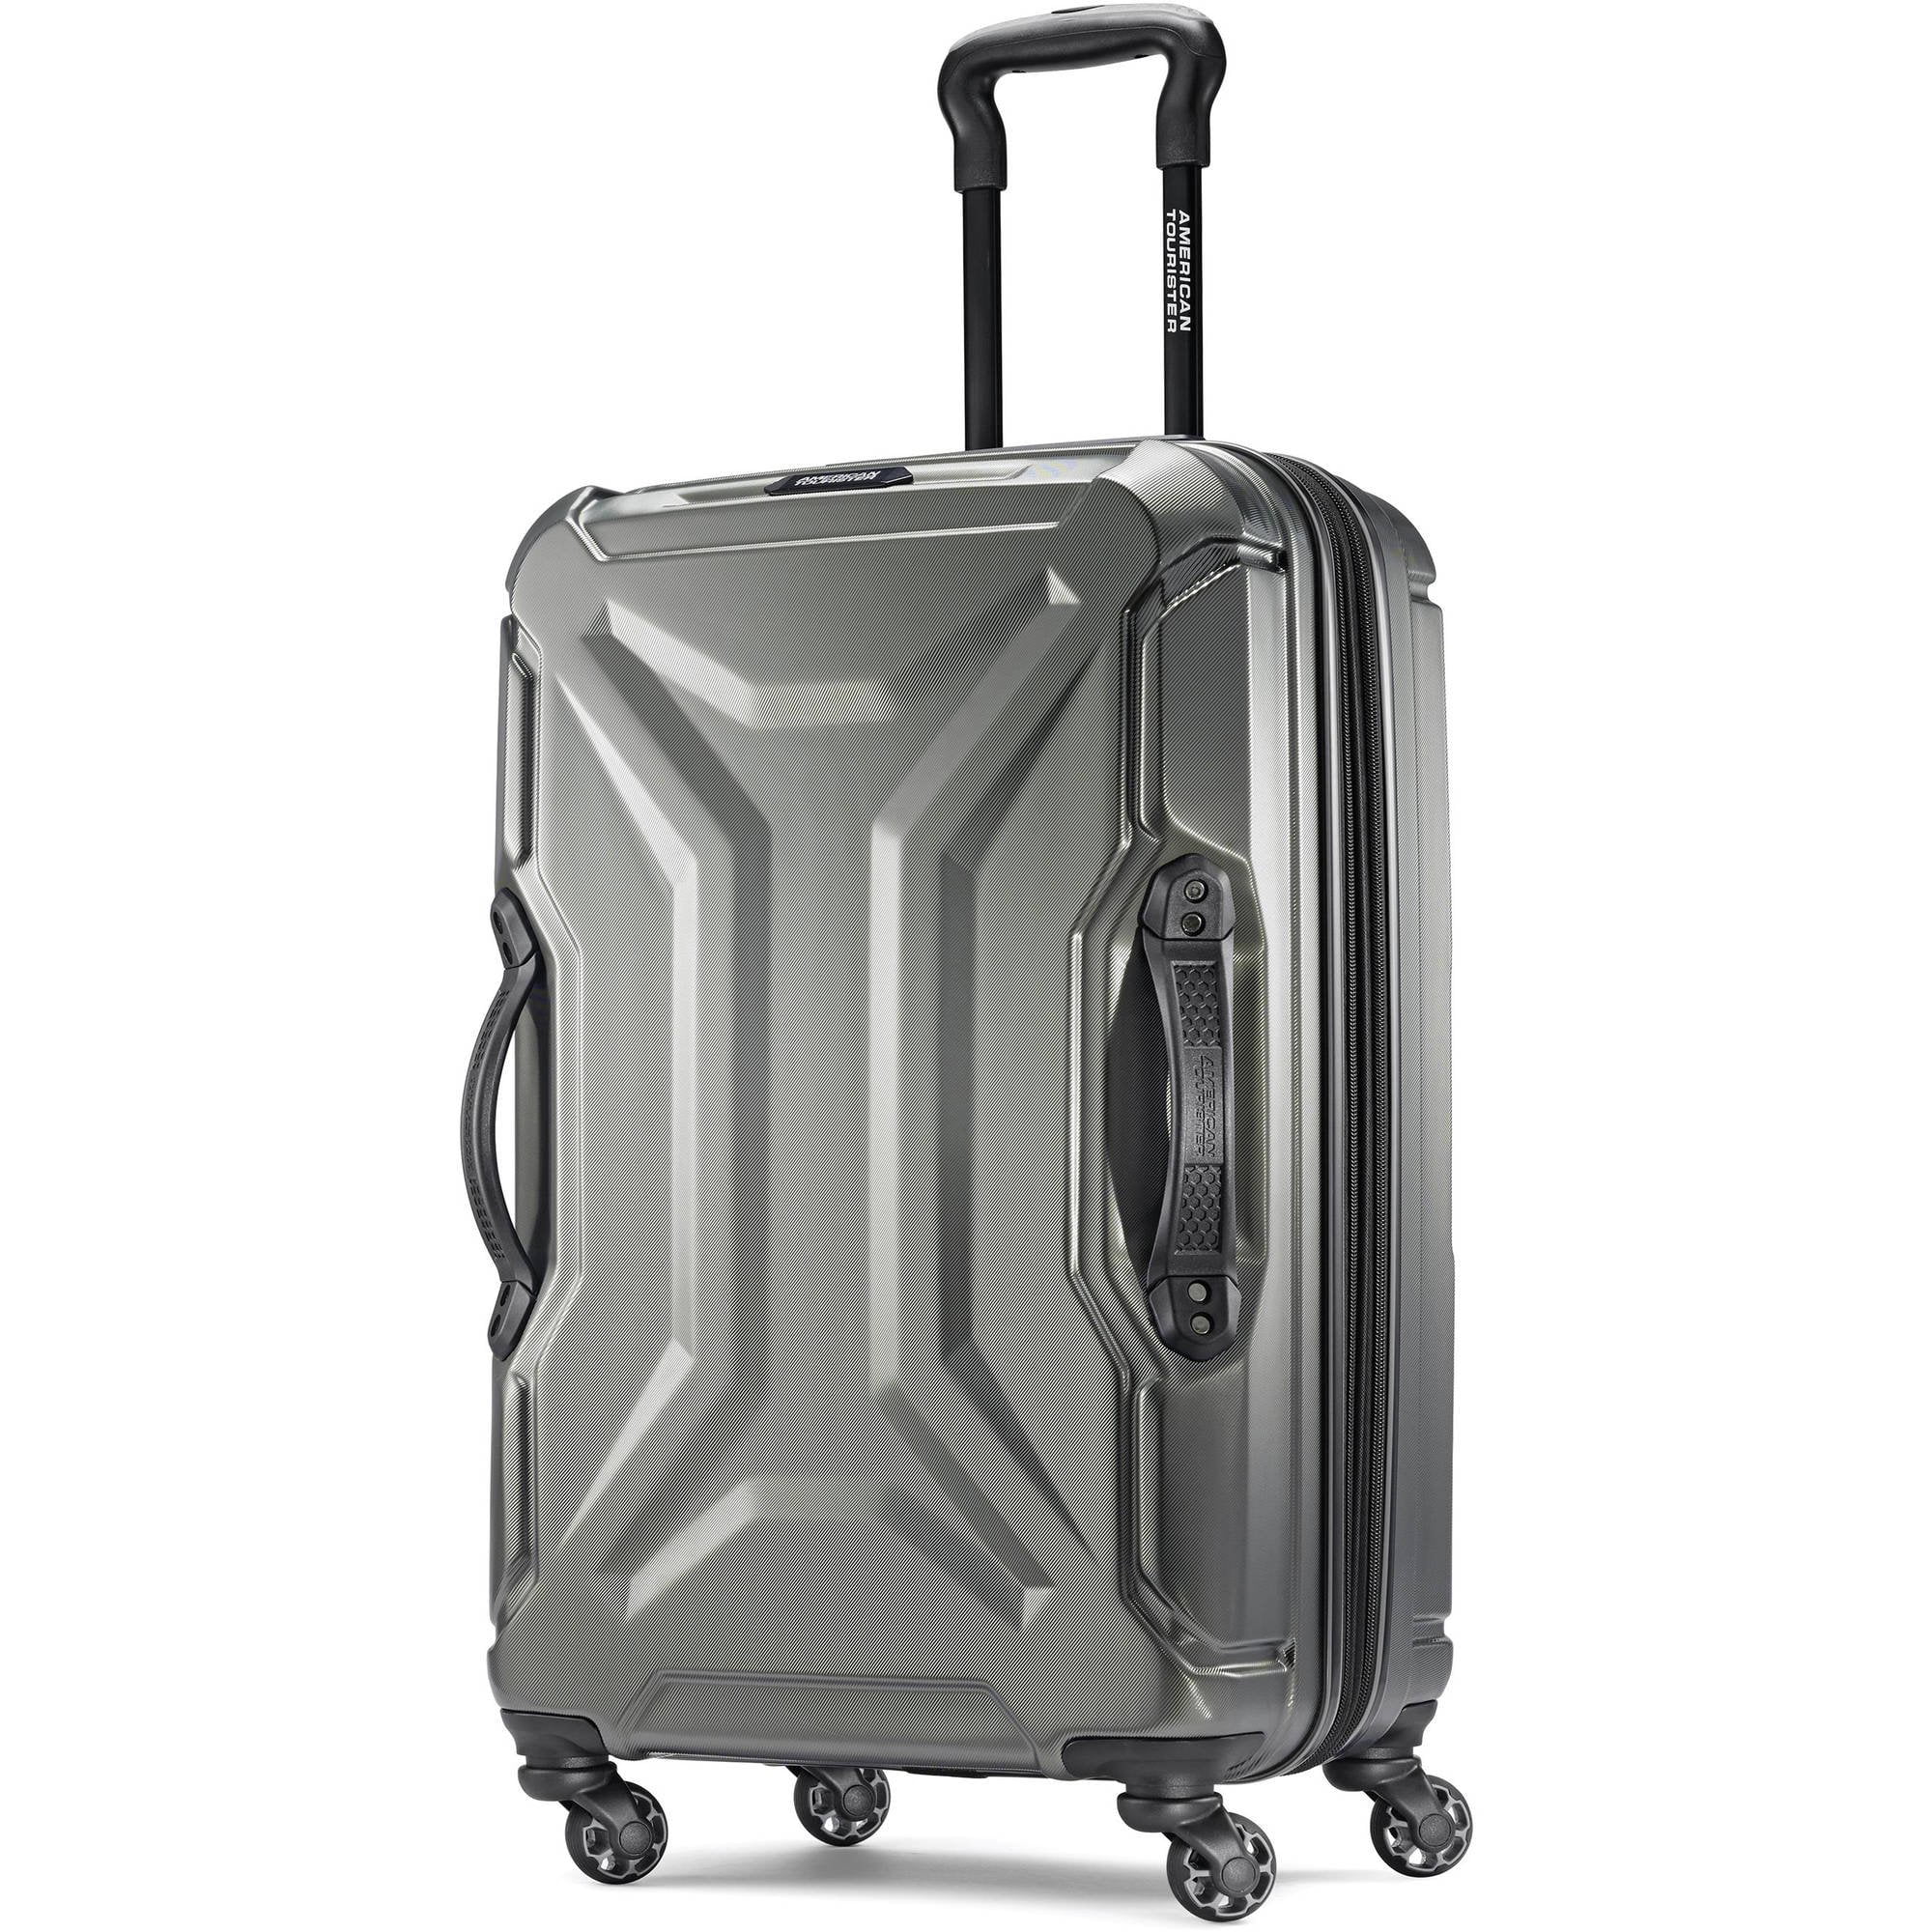 Hard-shell checked luggage